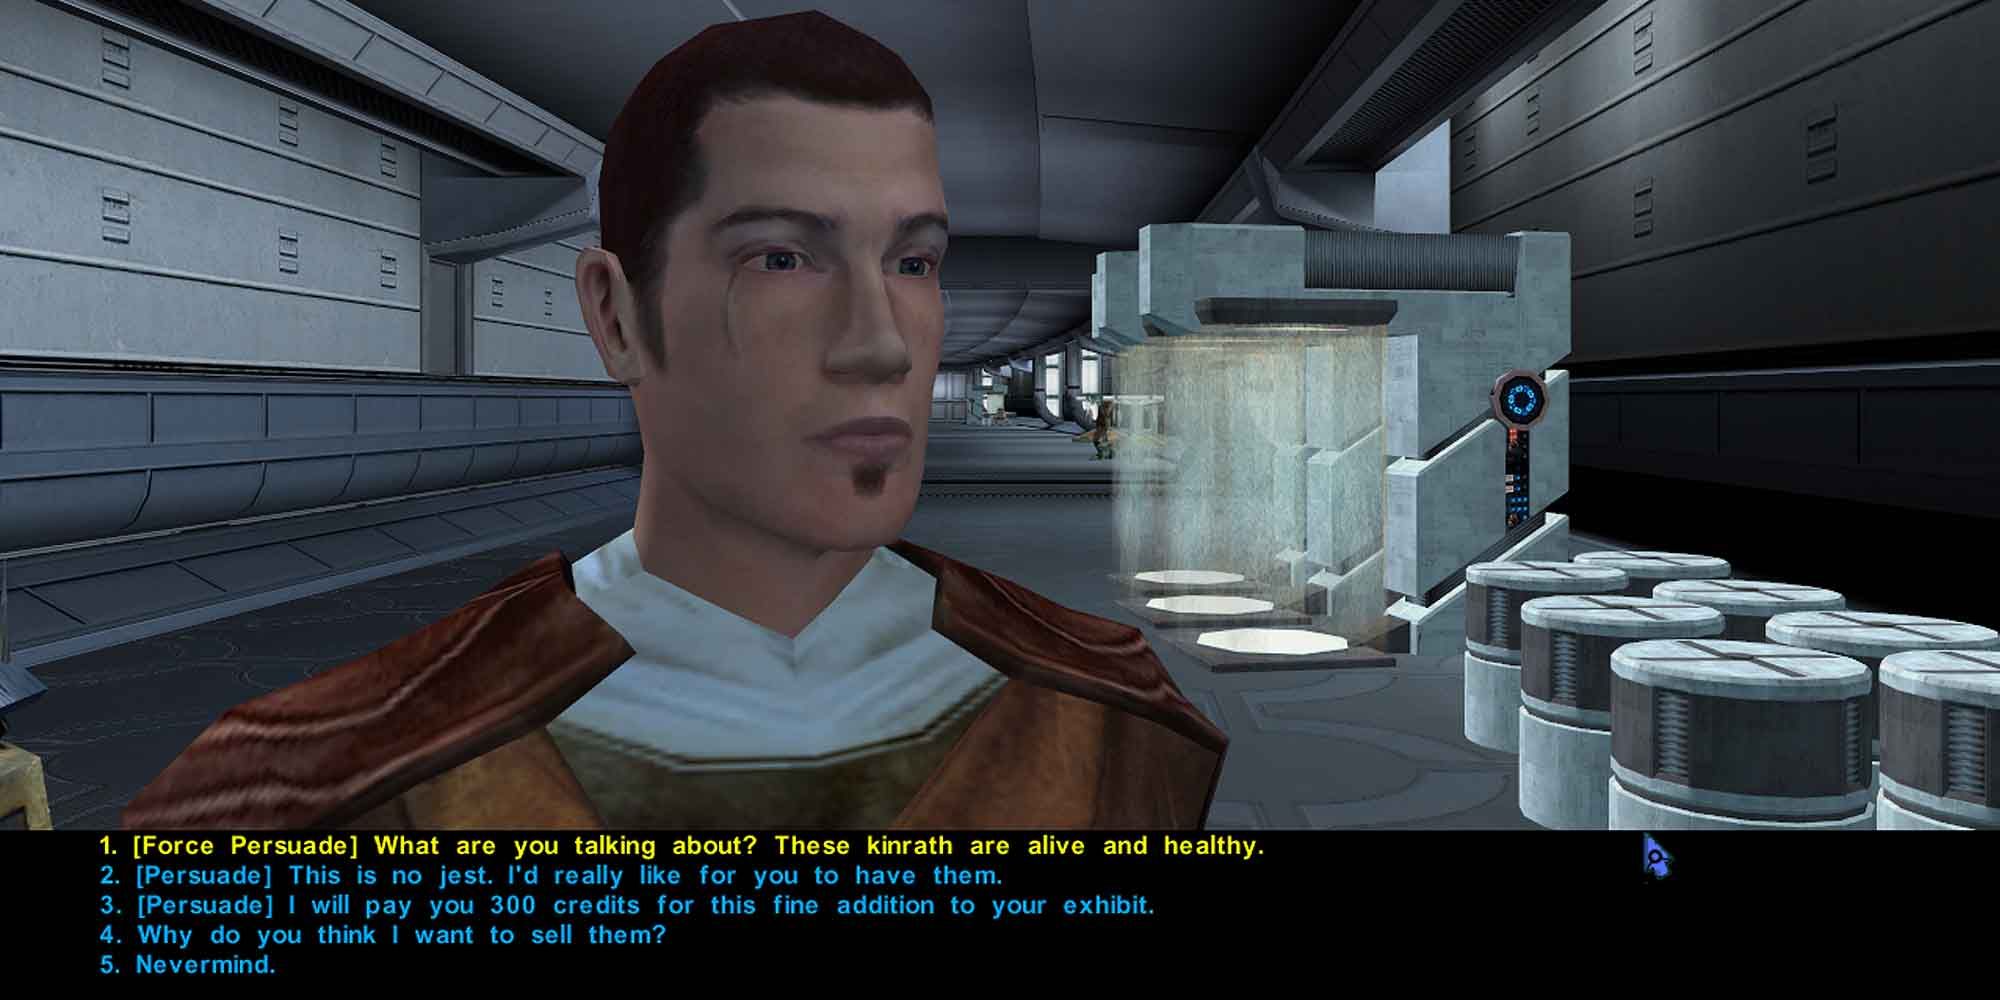 Using the Persuade ability in Star Wars: Knights of the Old Republic